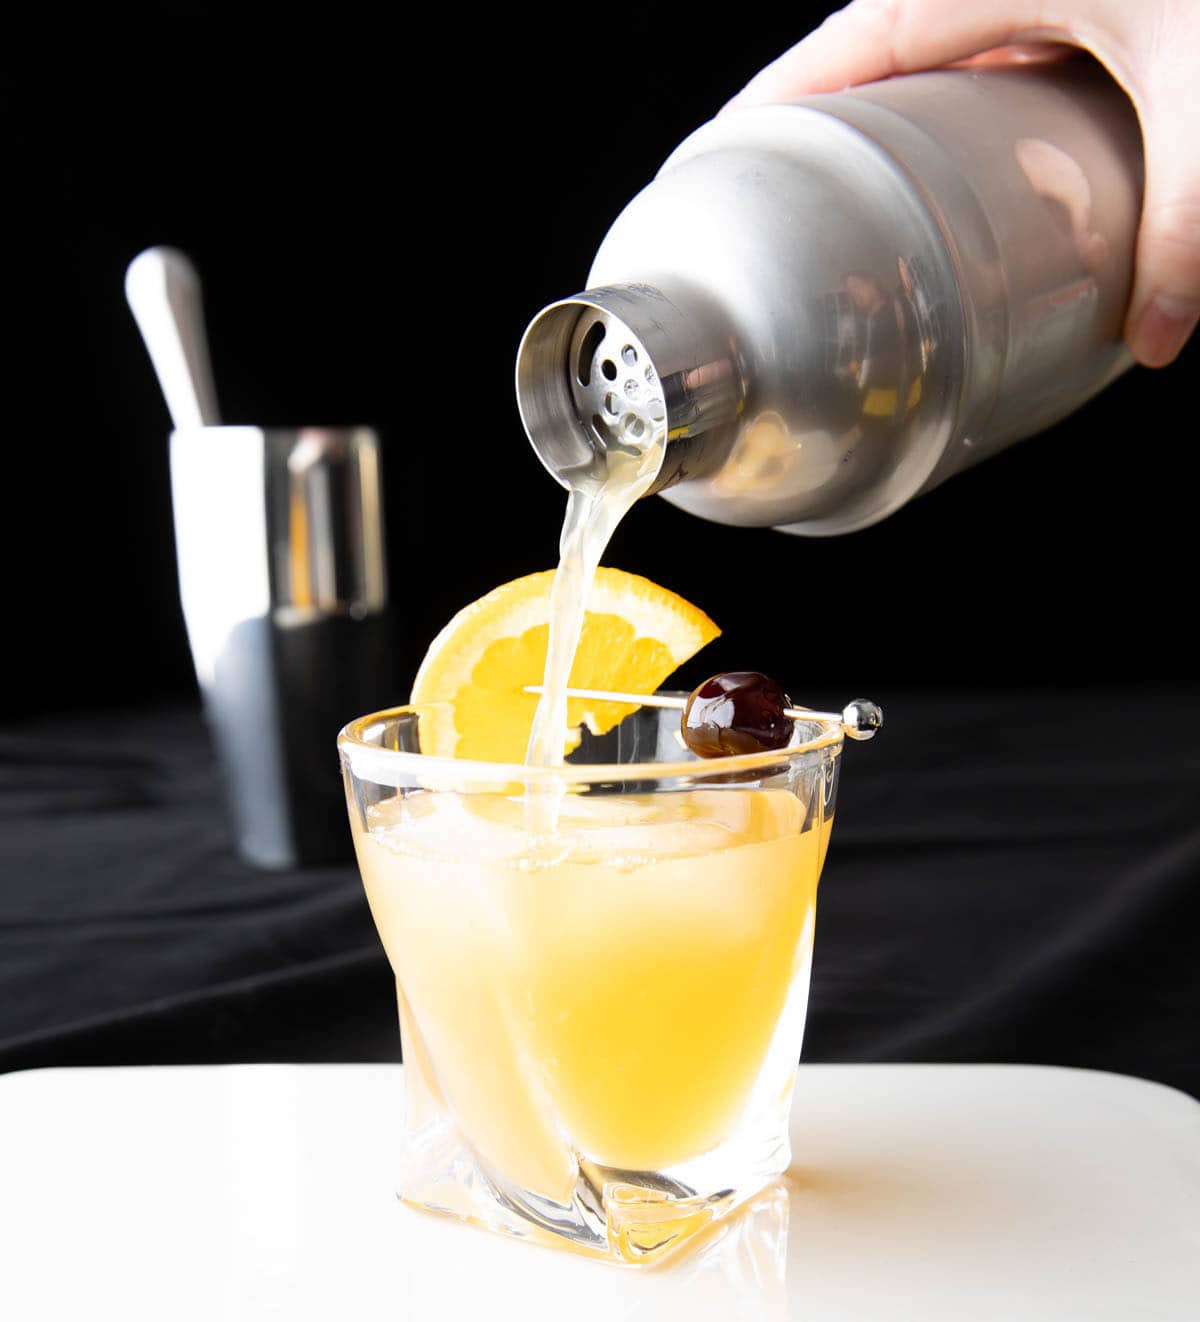 A photo showing How to Make a Whiskey Sour – pouring the last drop over the glass with an orange and cherry garnish